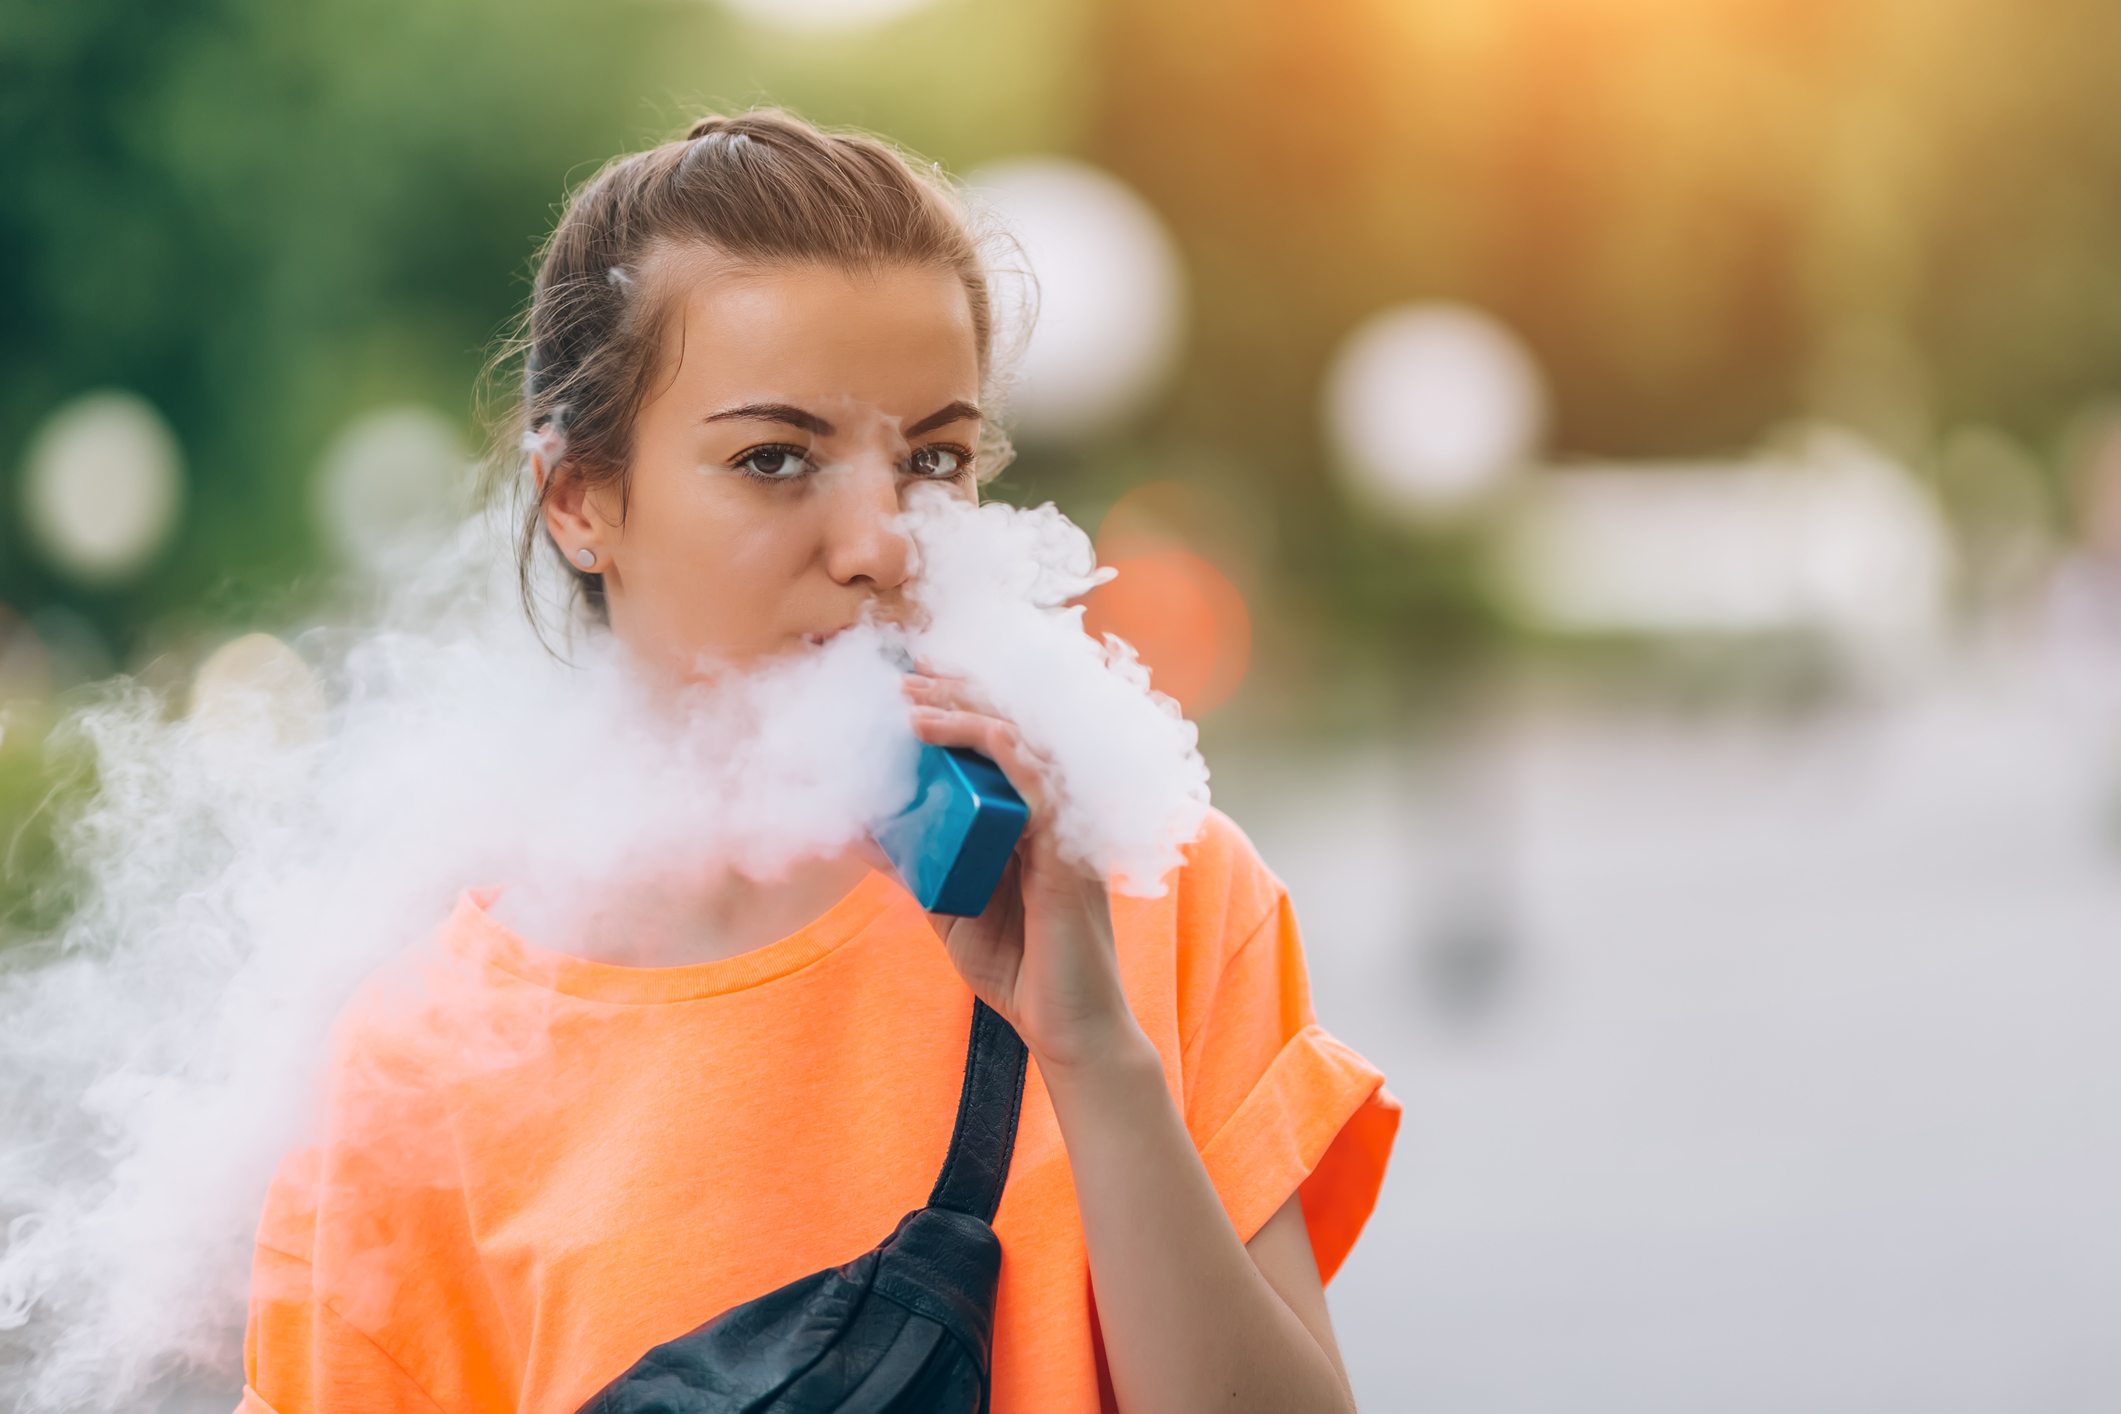 Physically active teens more likely to vape